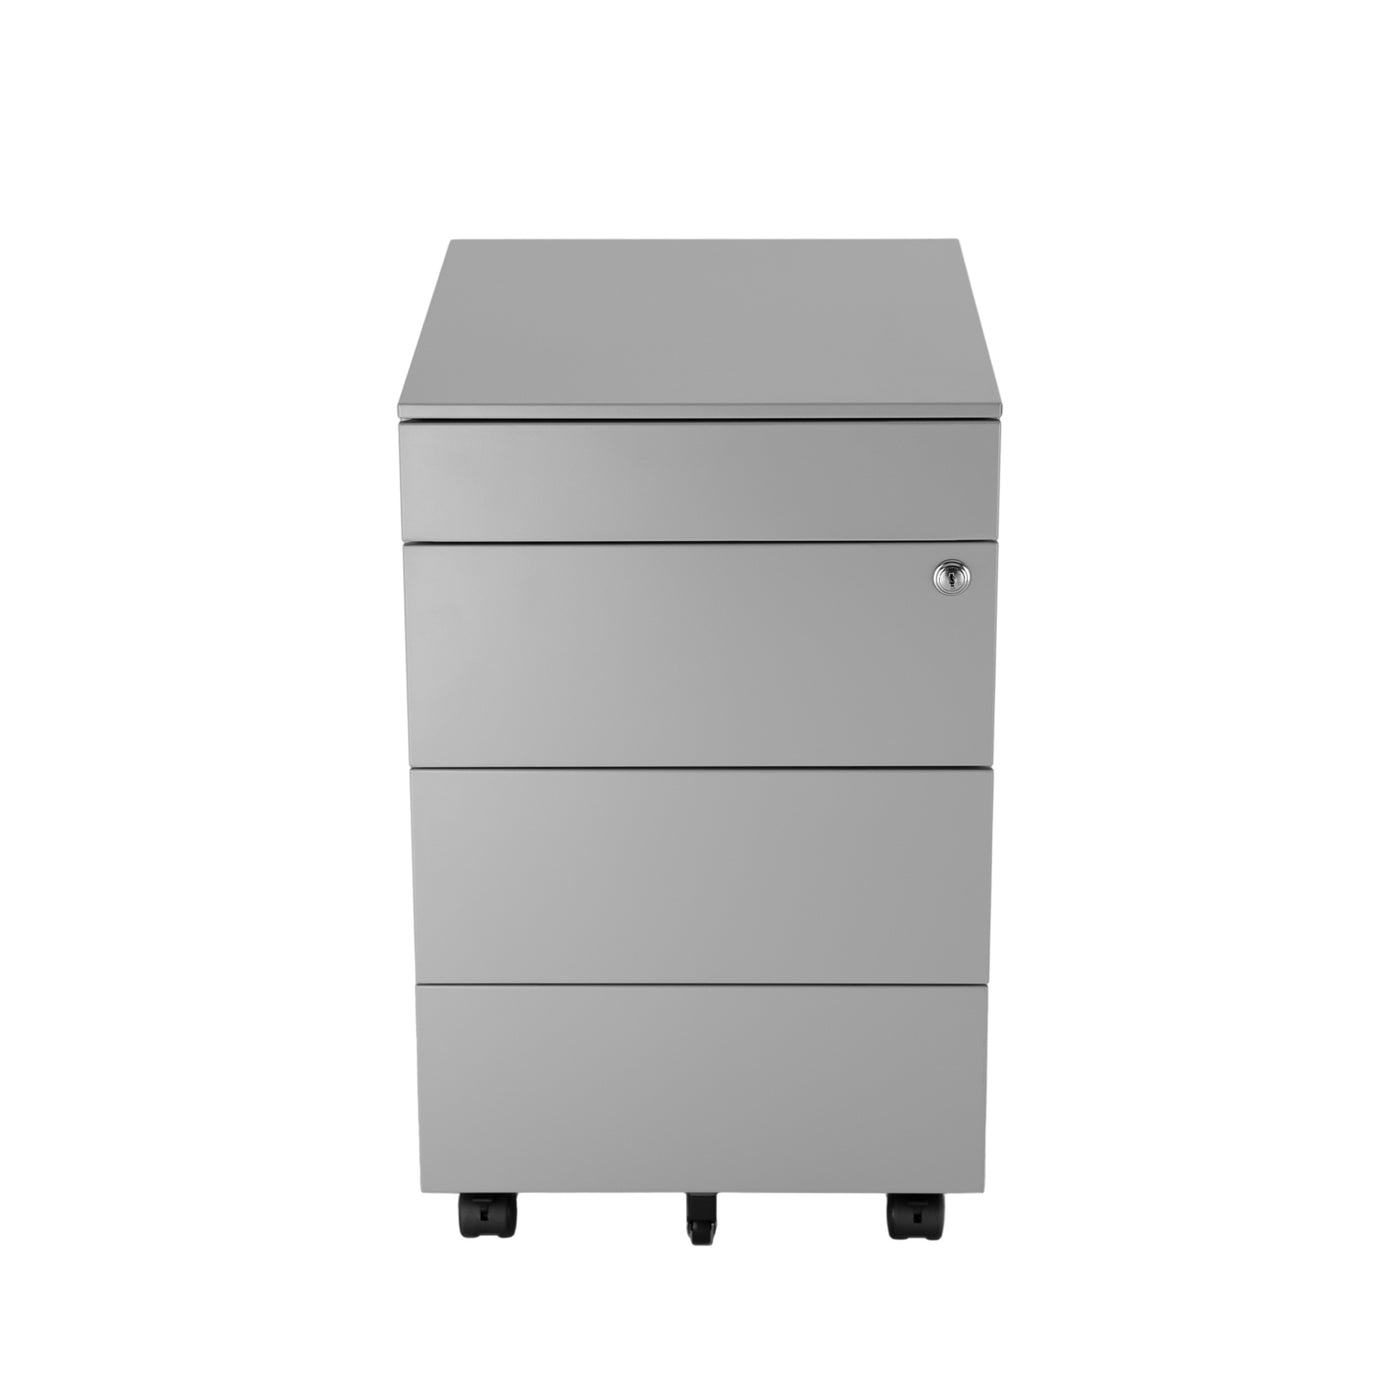 Mobile filing cabinet with pen tray